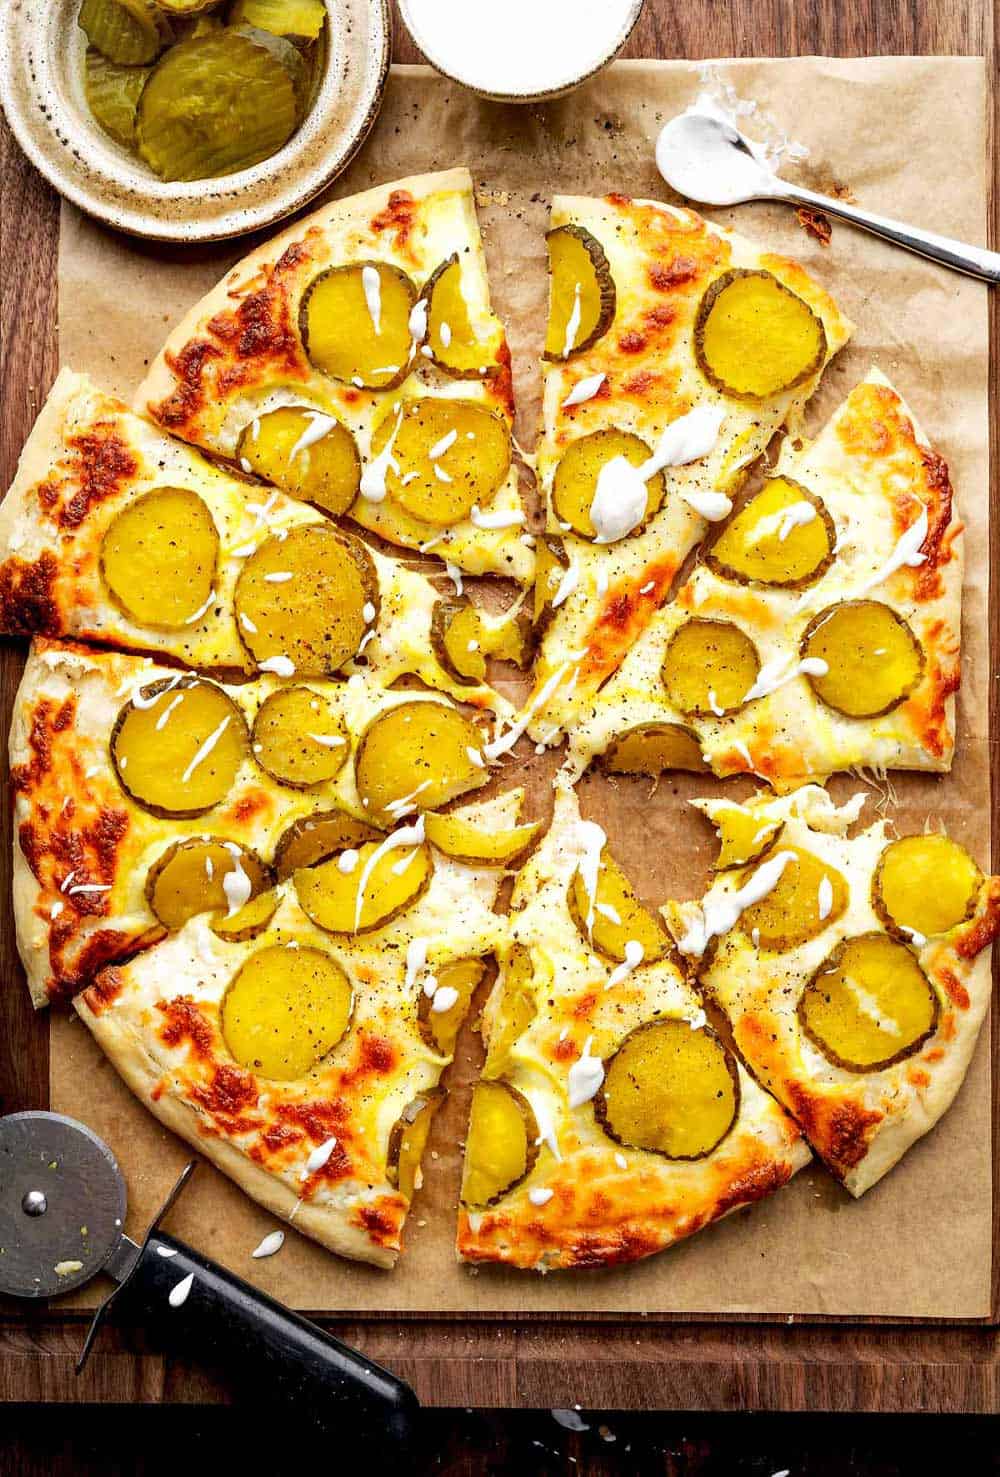 Overhead image of sliced Dill Pickle Pizza, showcasing the unique combination of pickles, cheese, and sauce on a crispy crust.